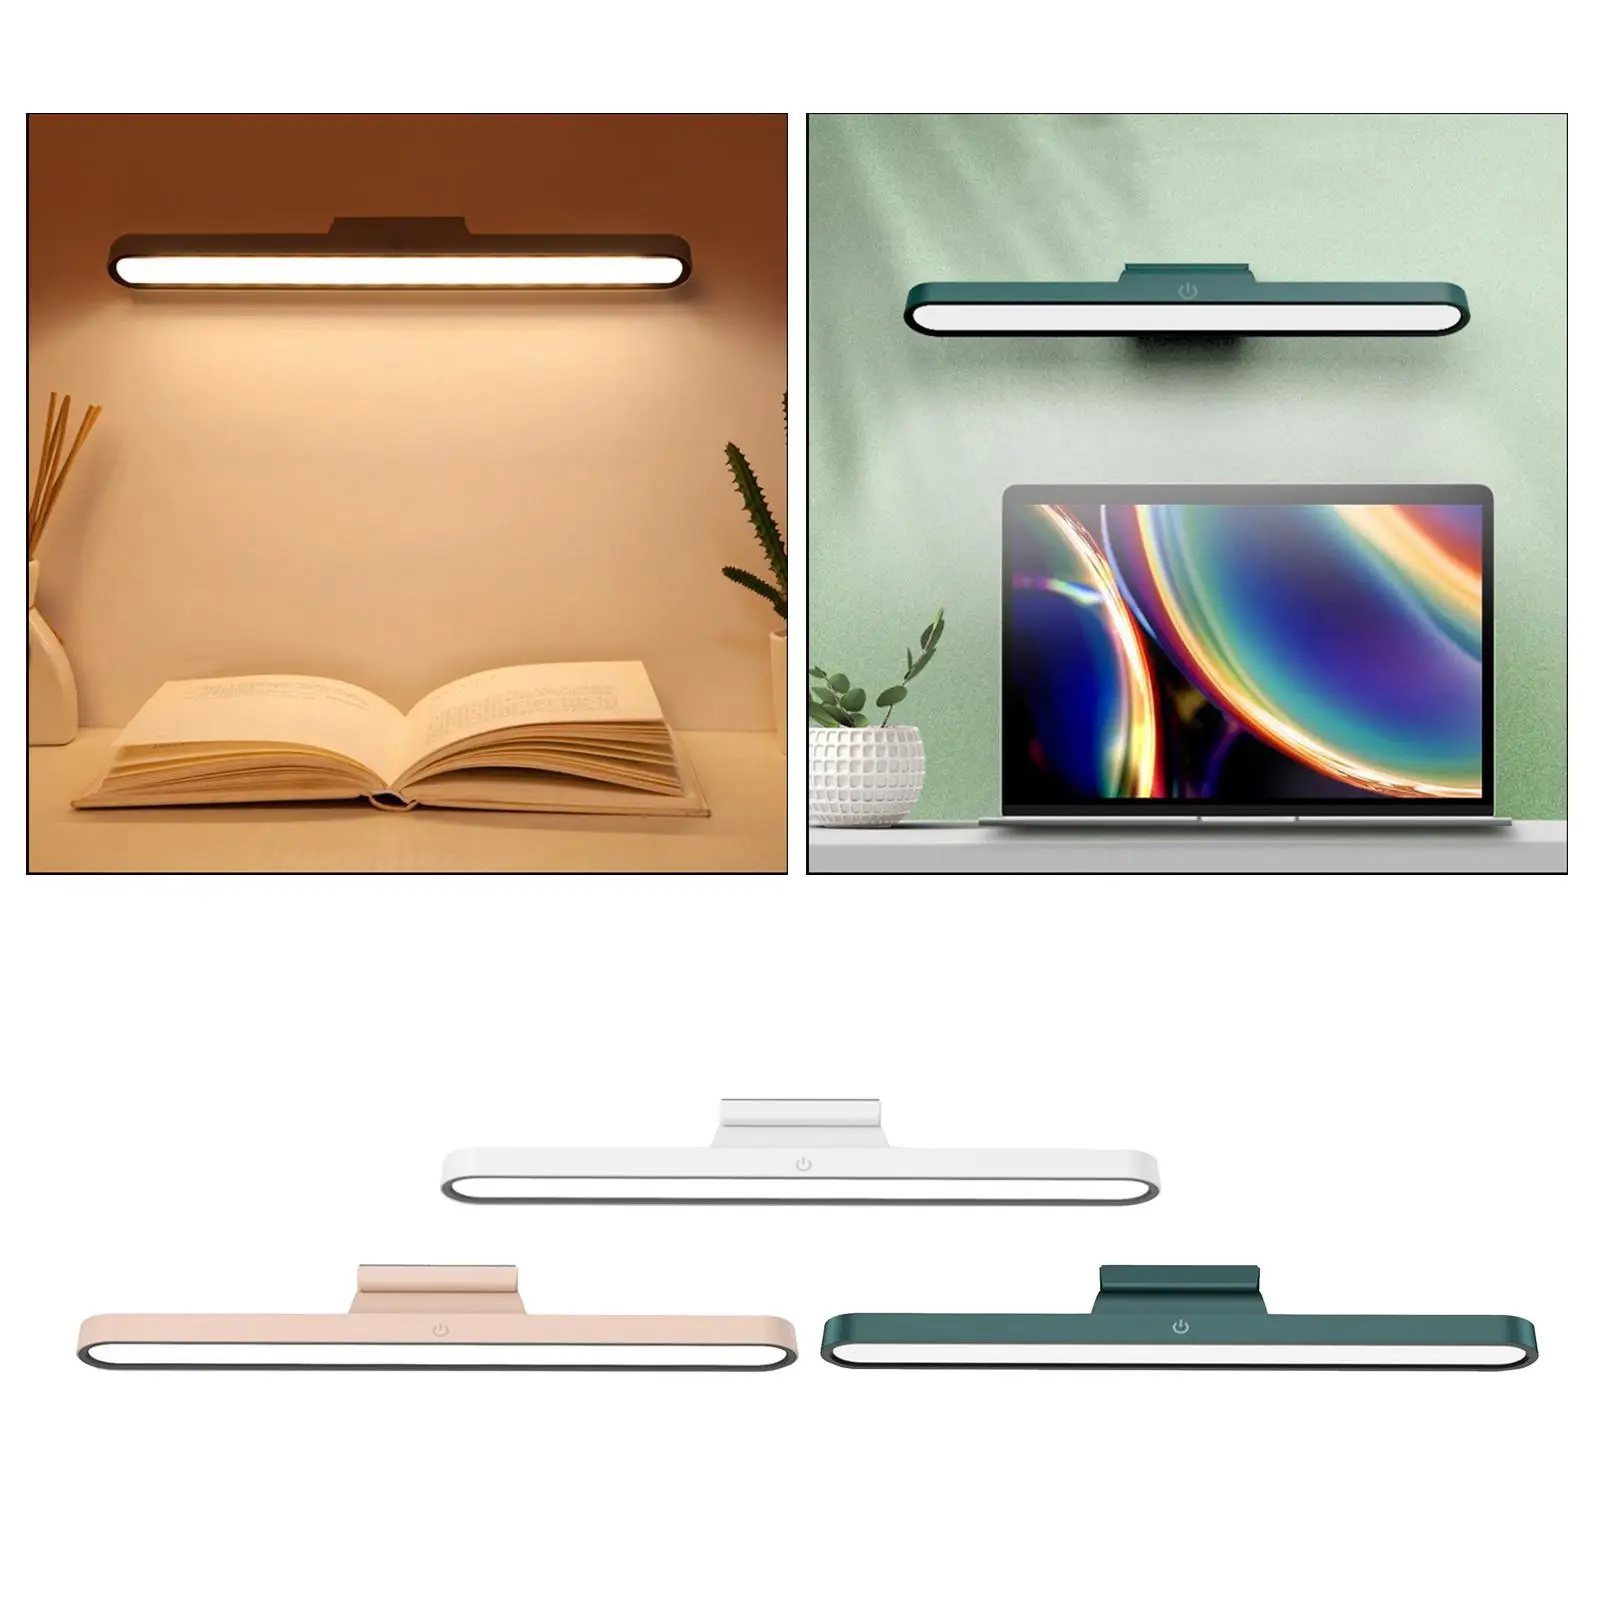 Reading Wall Lamp, Bunk Lamp, Dimmable  lights,  under Cabinet Mount, Rechargeable LED Lighting, 